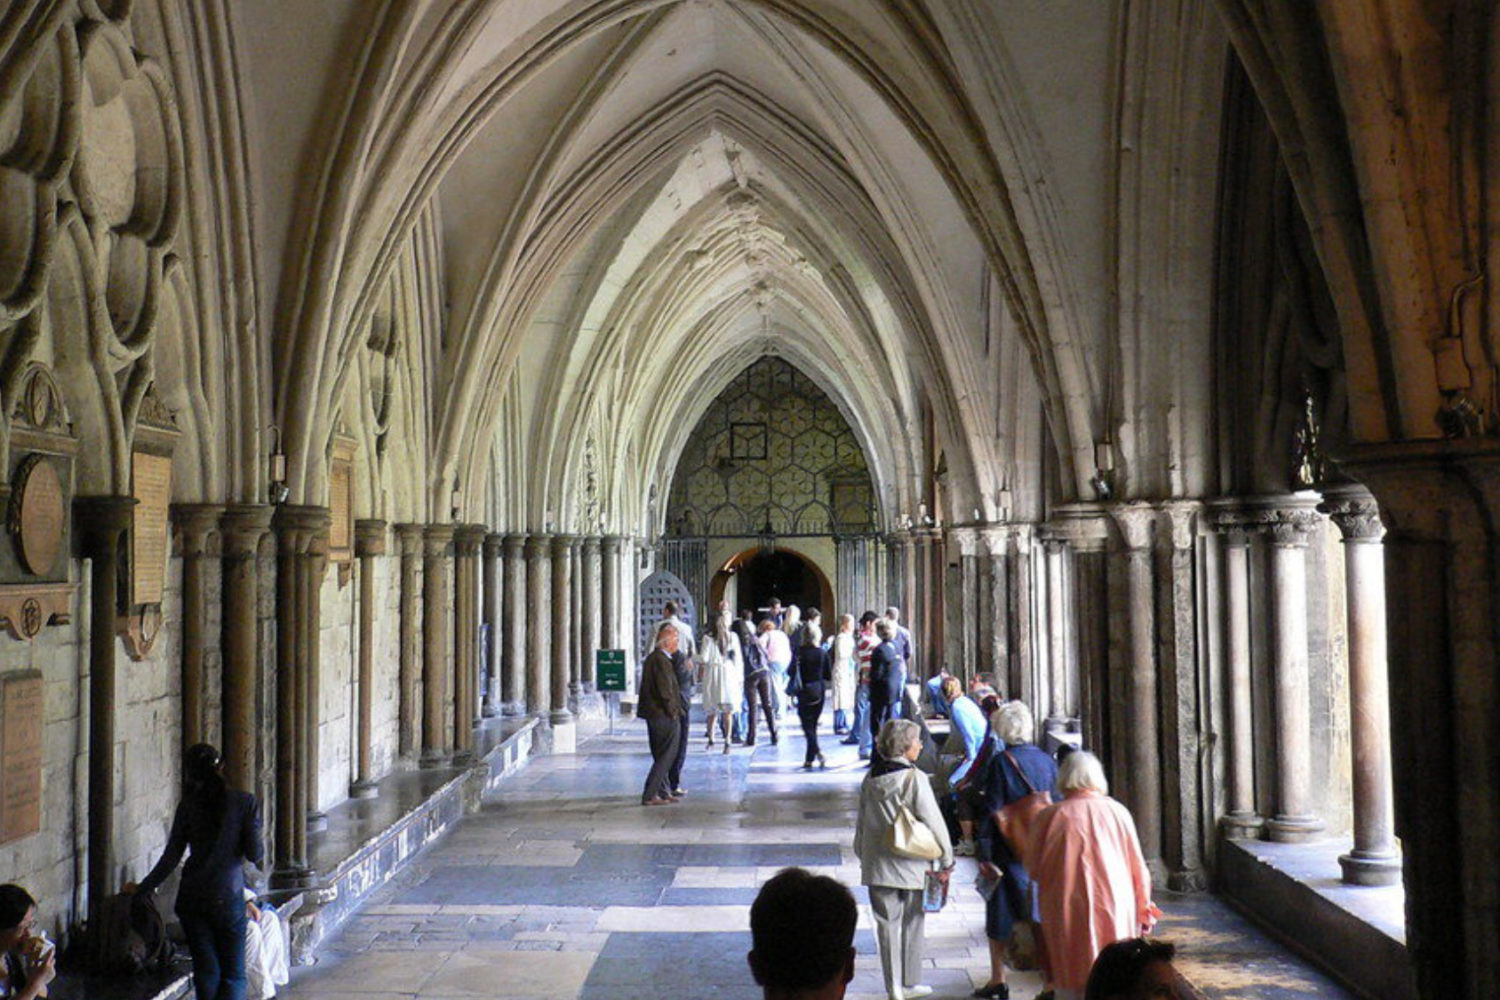 westminster abbey private tour guide cloisters